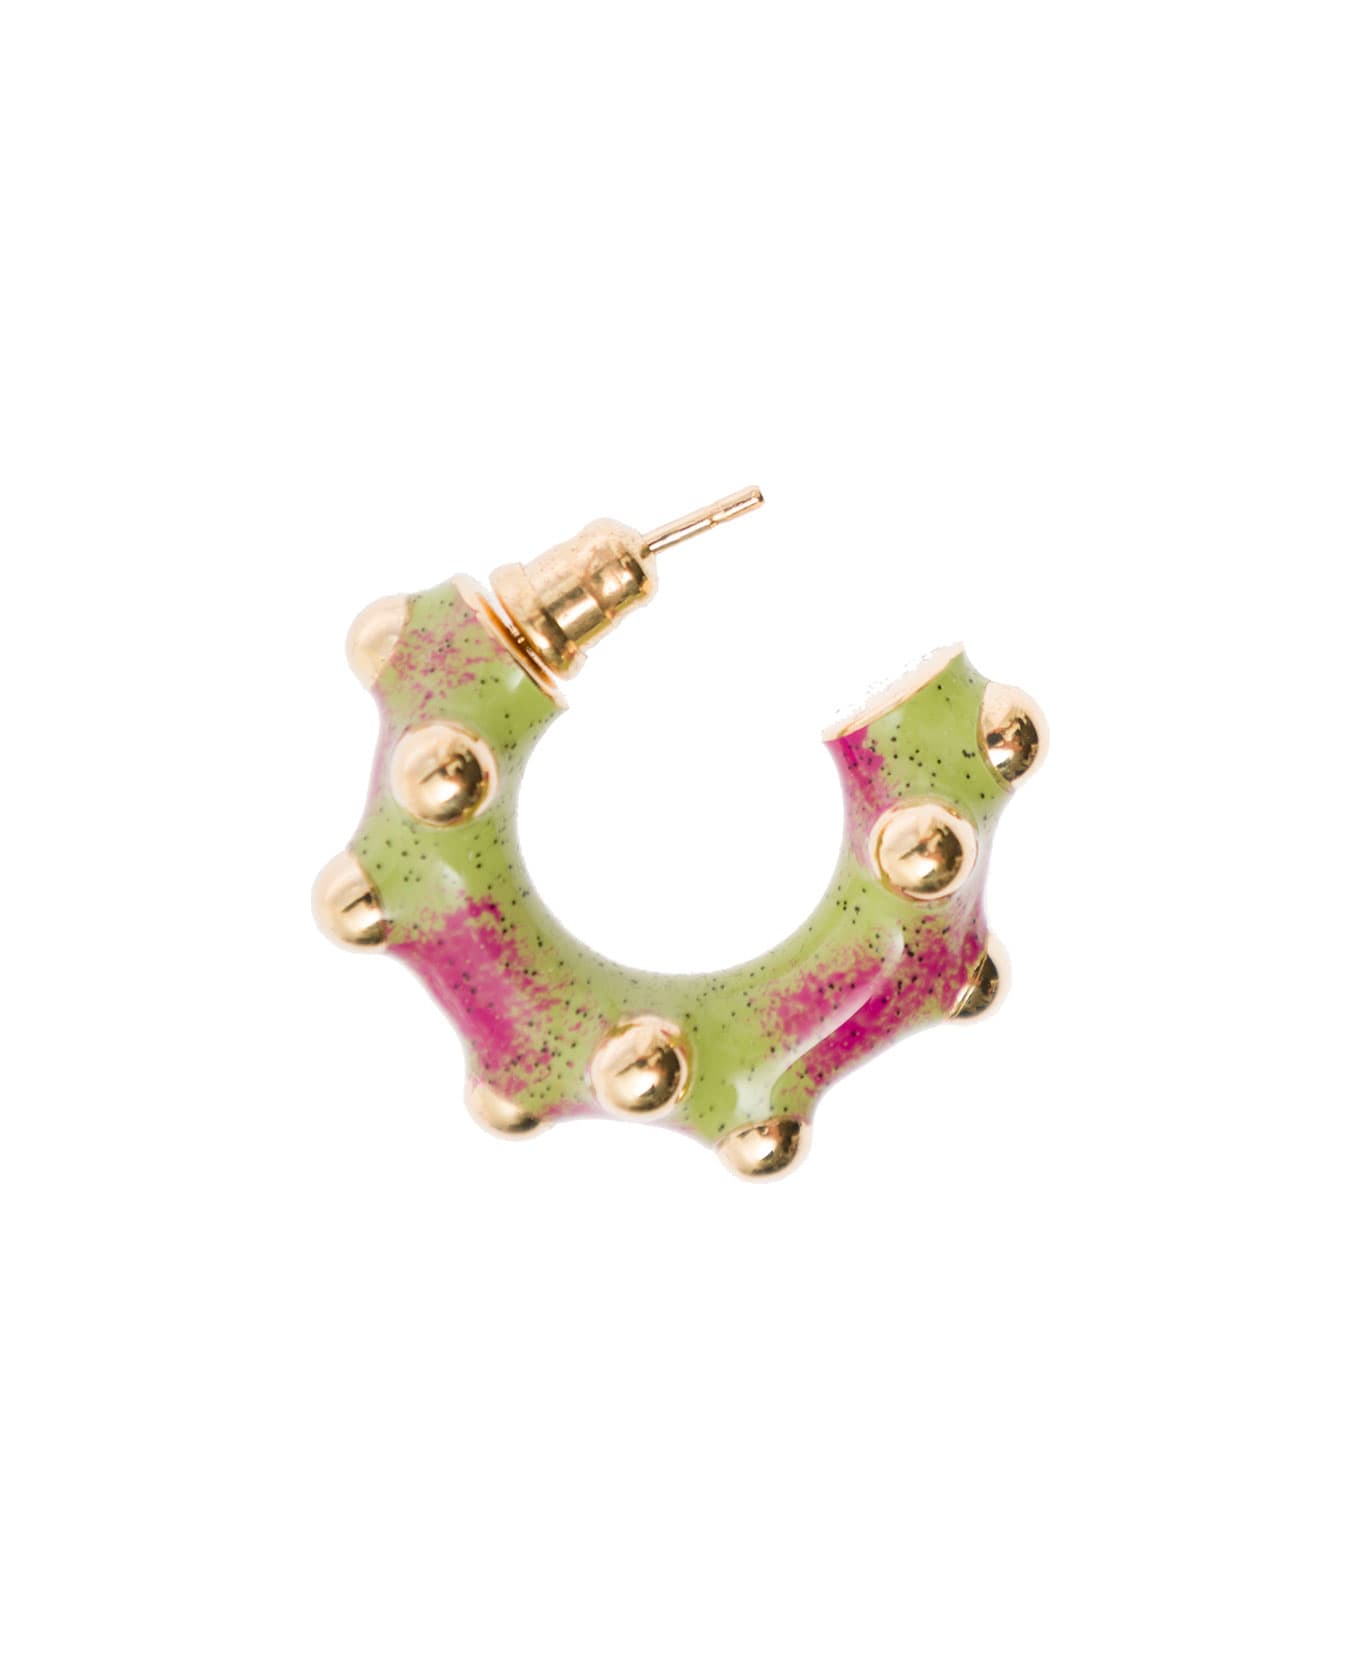 Panconesi Multicolor Asymmetric Earrings With Studs In 18k Gold Plated Brass Woman - Green